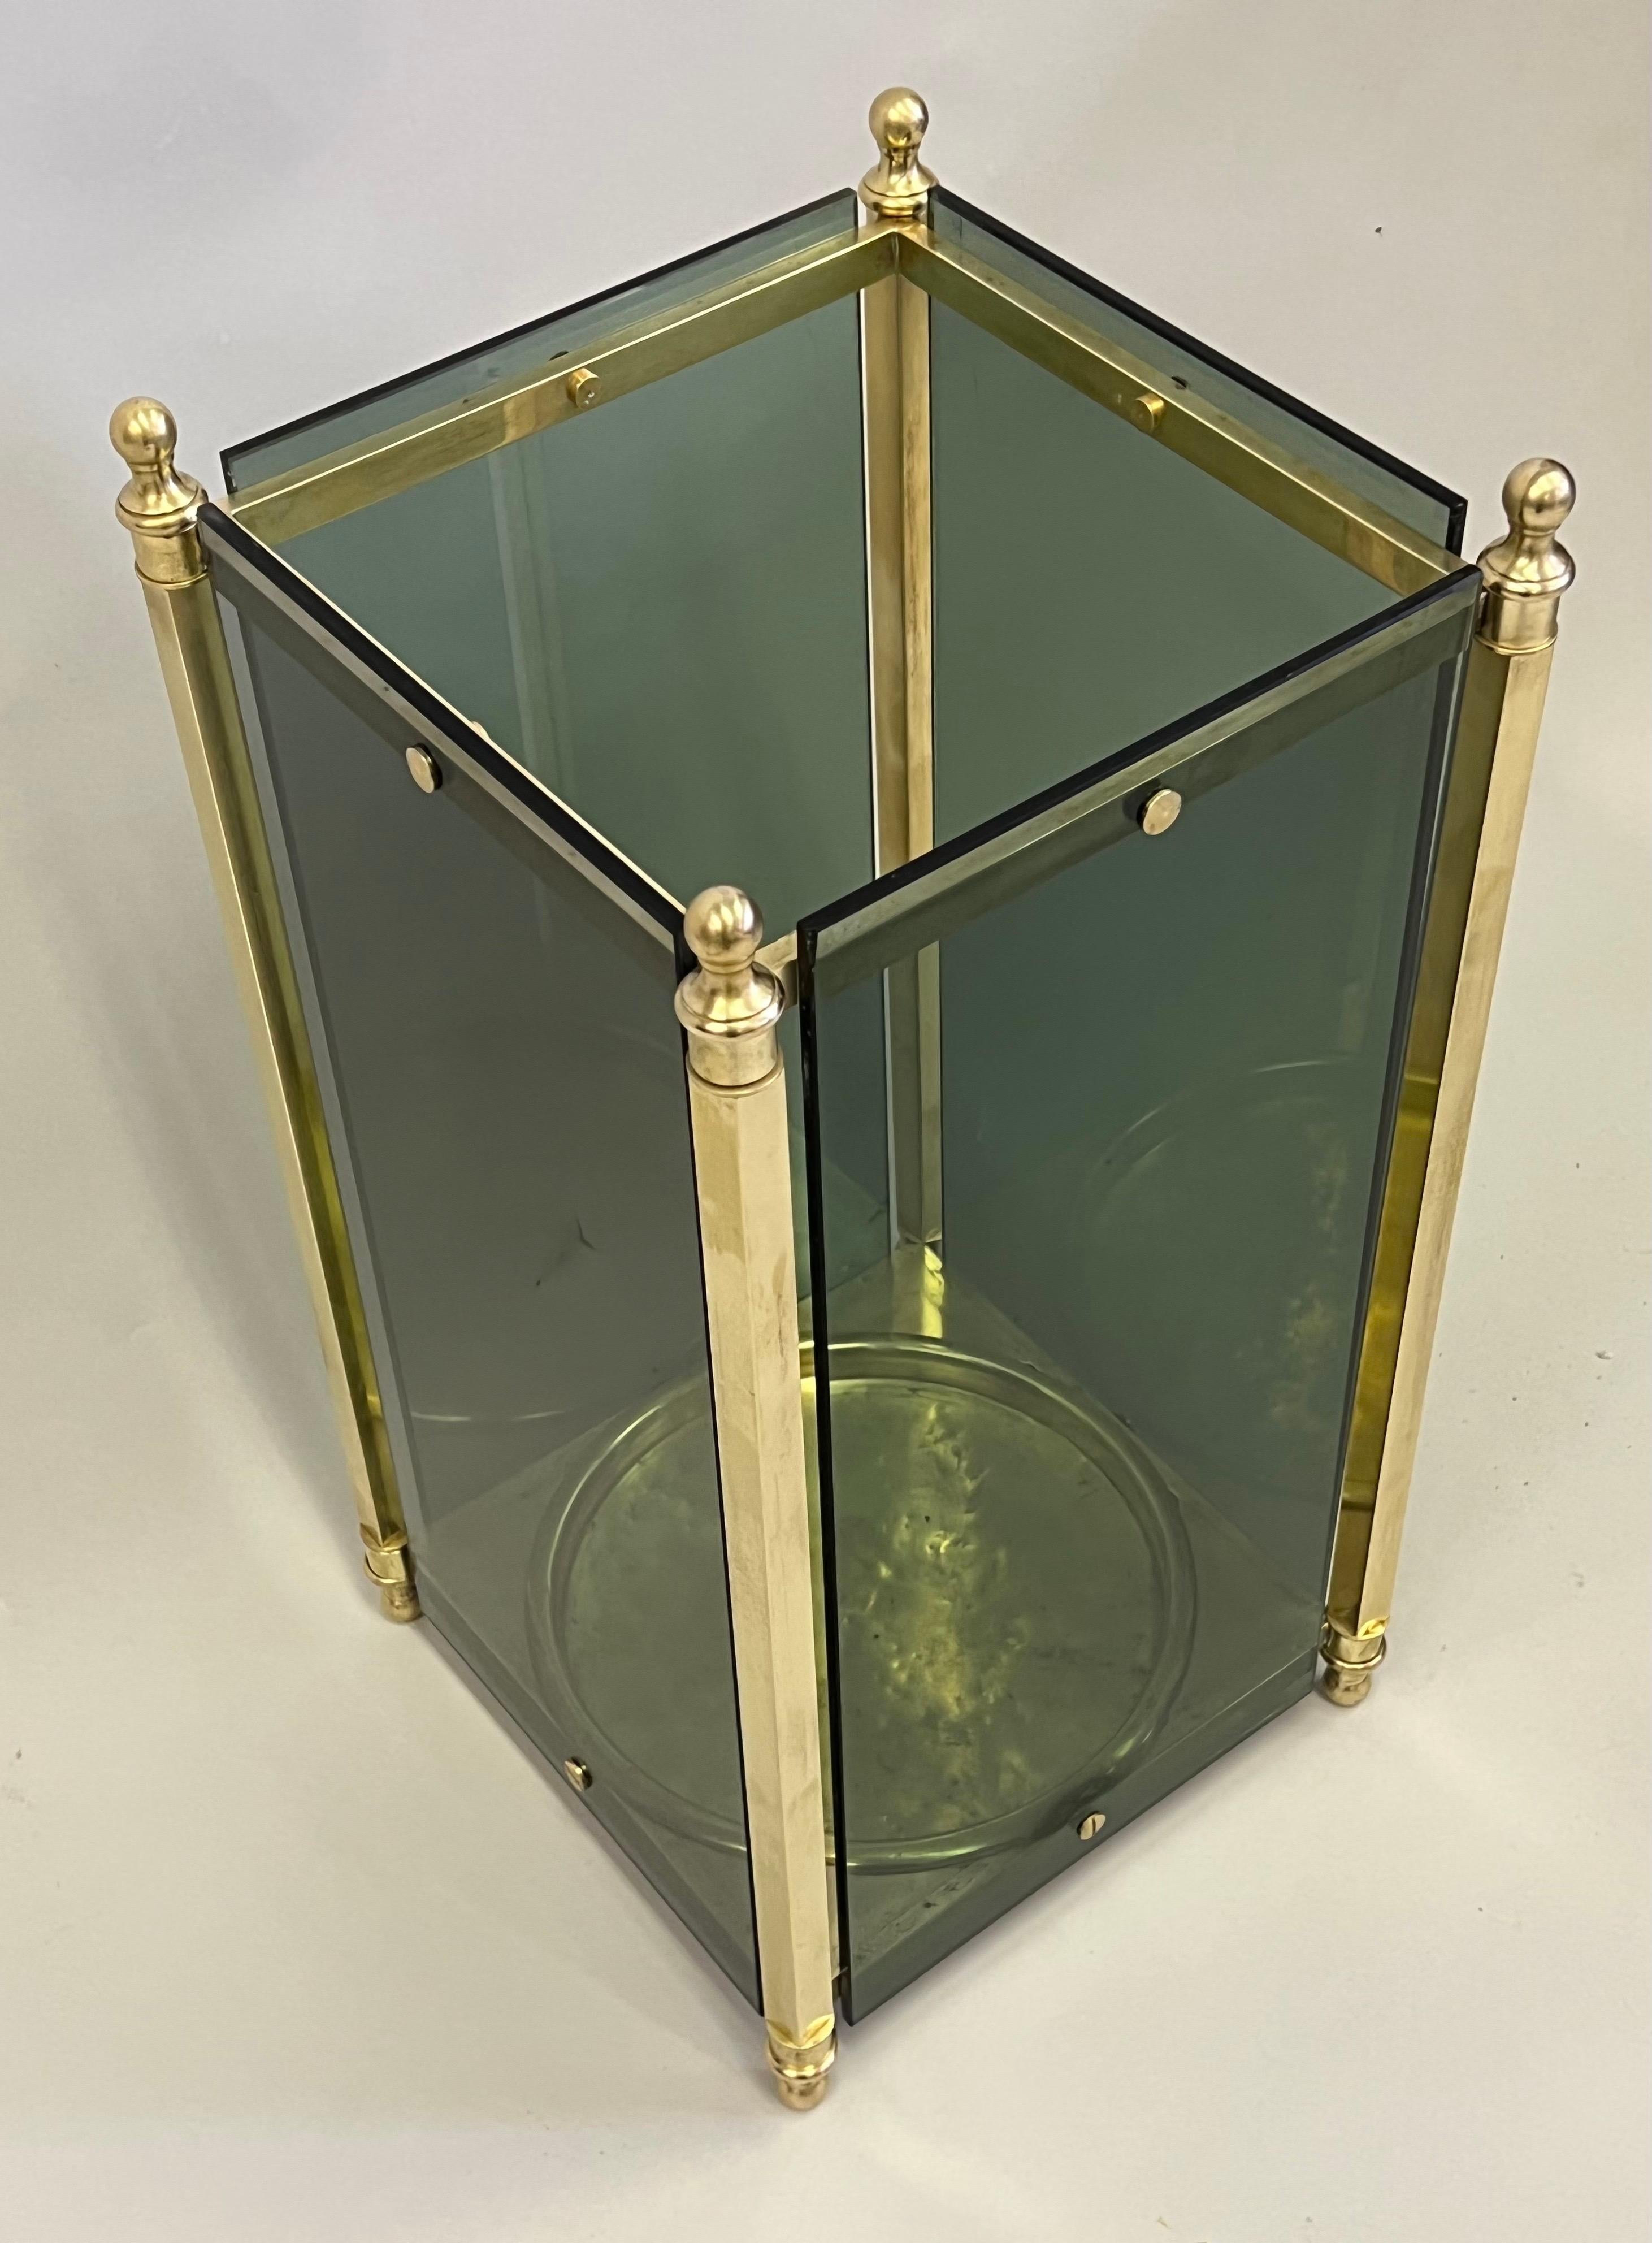 A rare, elegant Italian Mid-Century Modern neoclassical umbrella stand by Fontana Arte. The piece is composed of a solid brass frame with a brass center plate and finished with brass finials, brass rivets and exquisite finishing throughout; the